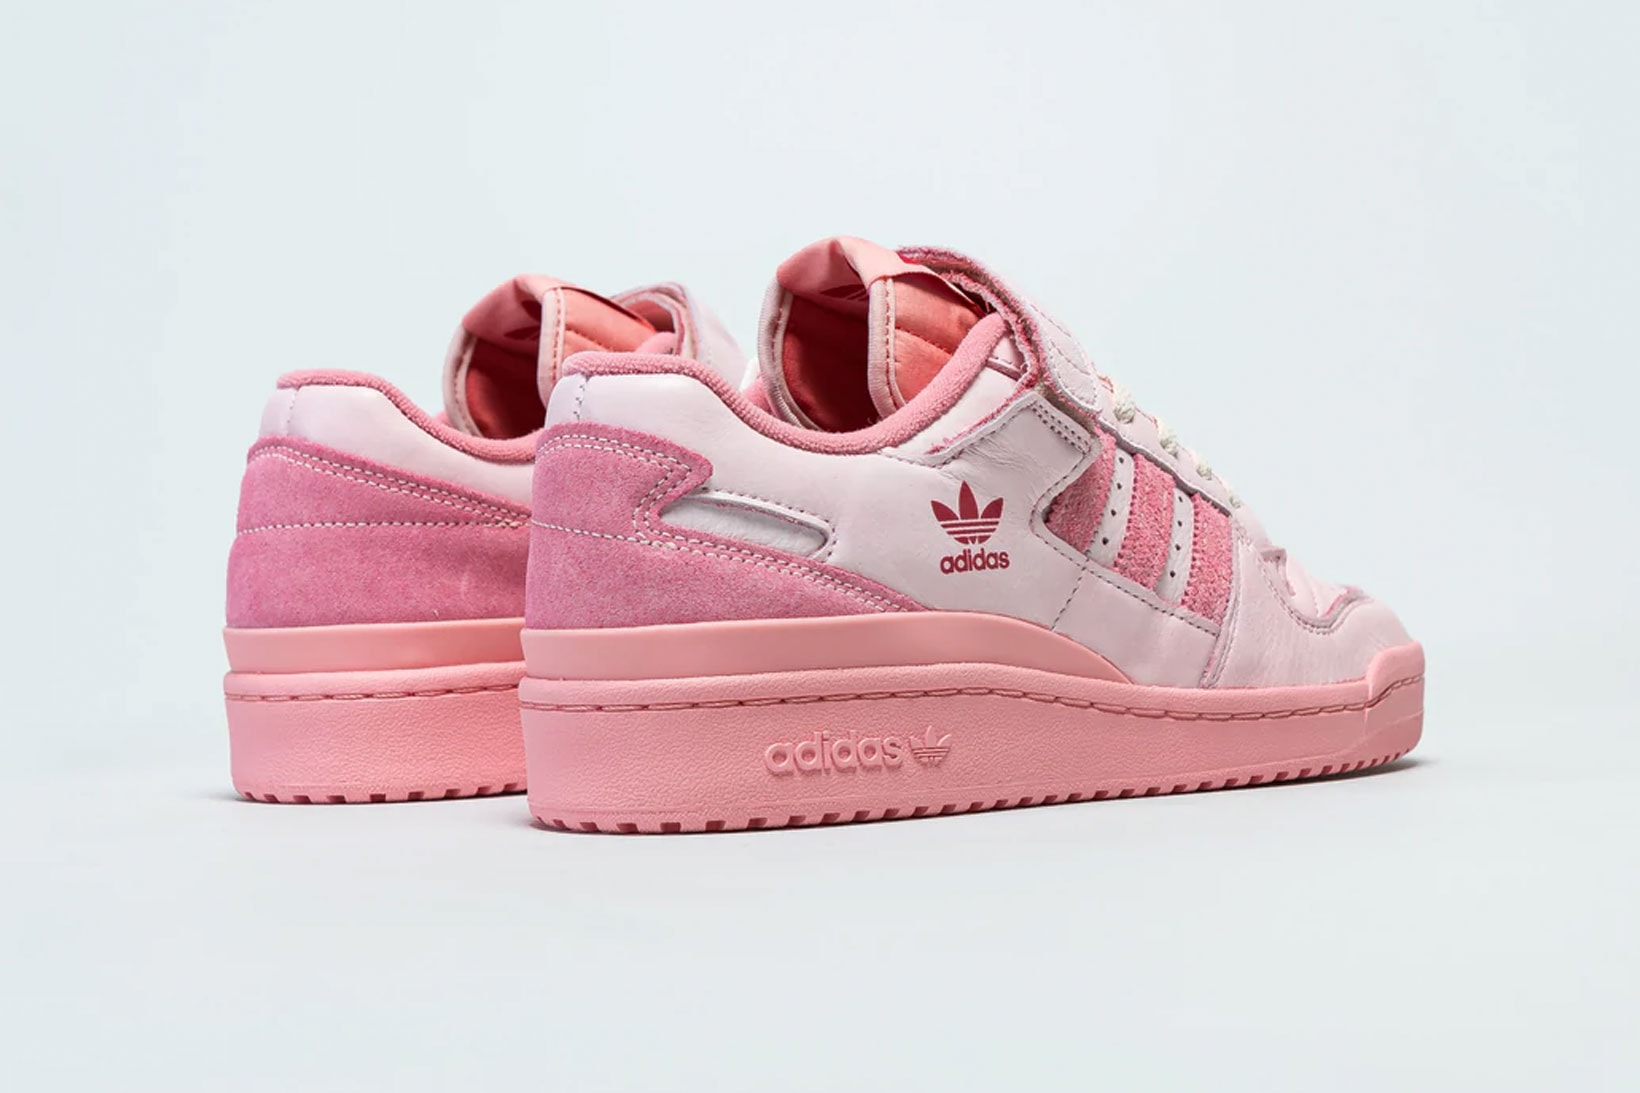 adidas Originals Forum '84 Low 'Team Power Red" Pink Sneakers Release Where to buy